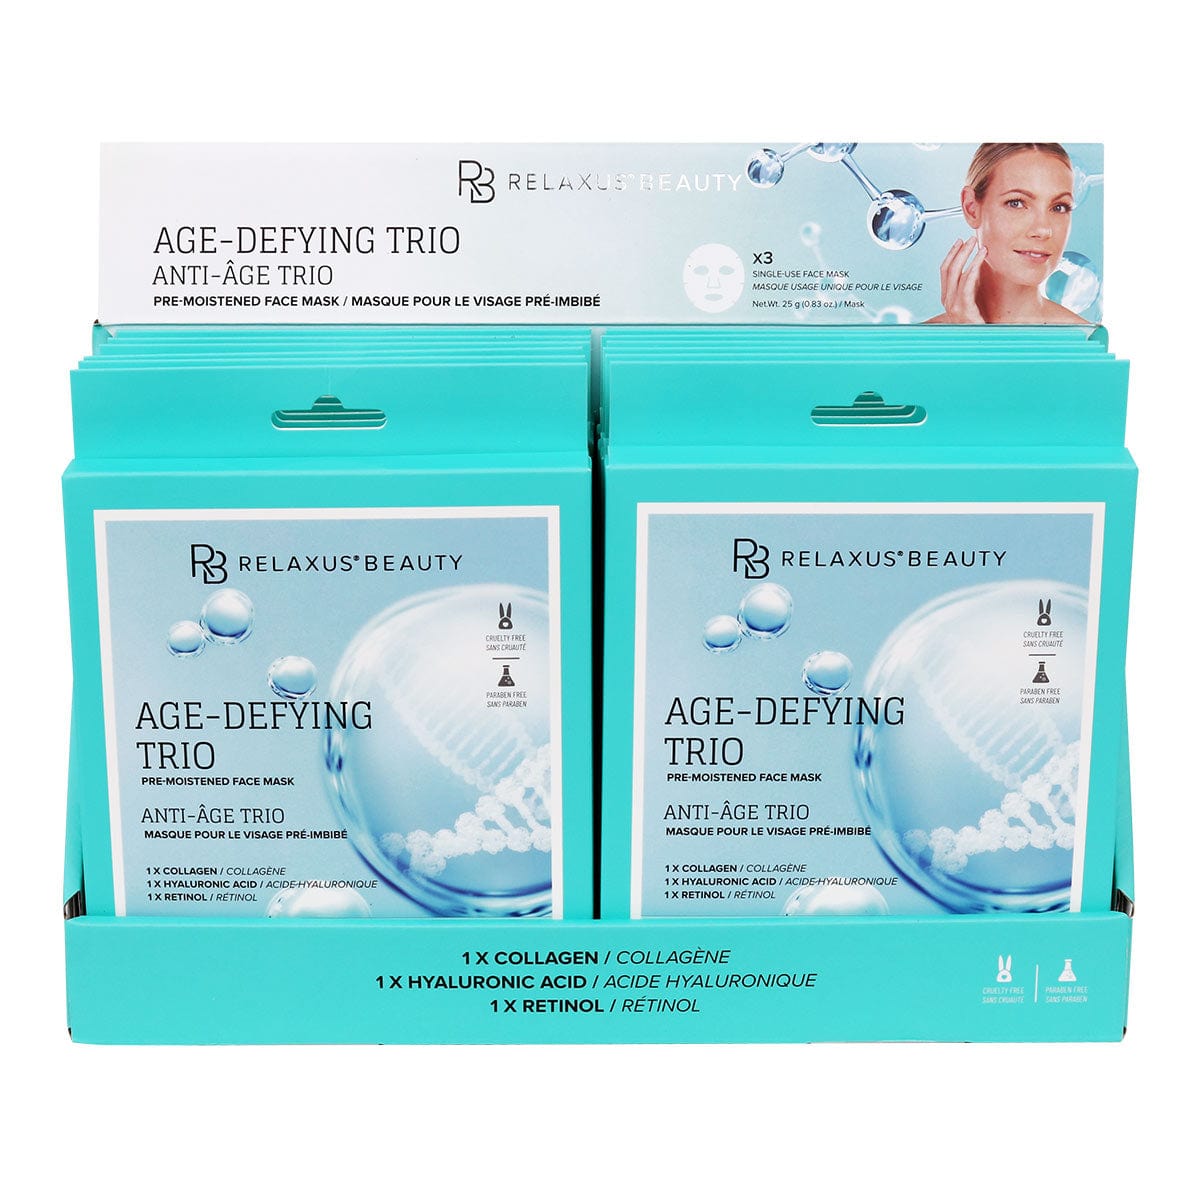 Wholesale Age-Defying Trio Face Masks - Displayer of 12